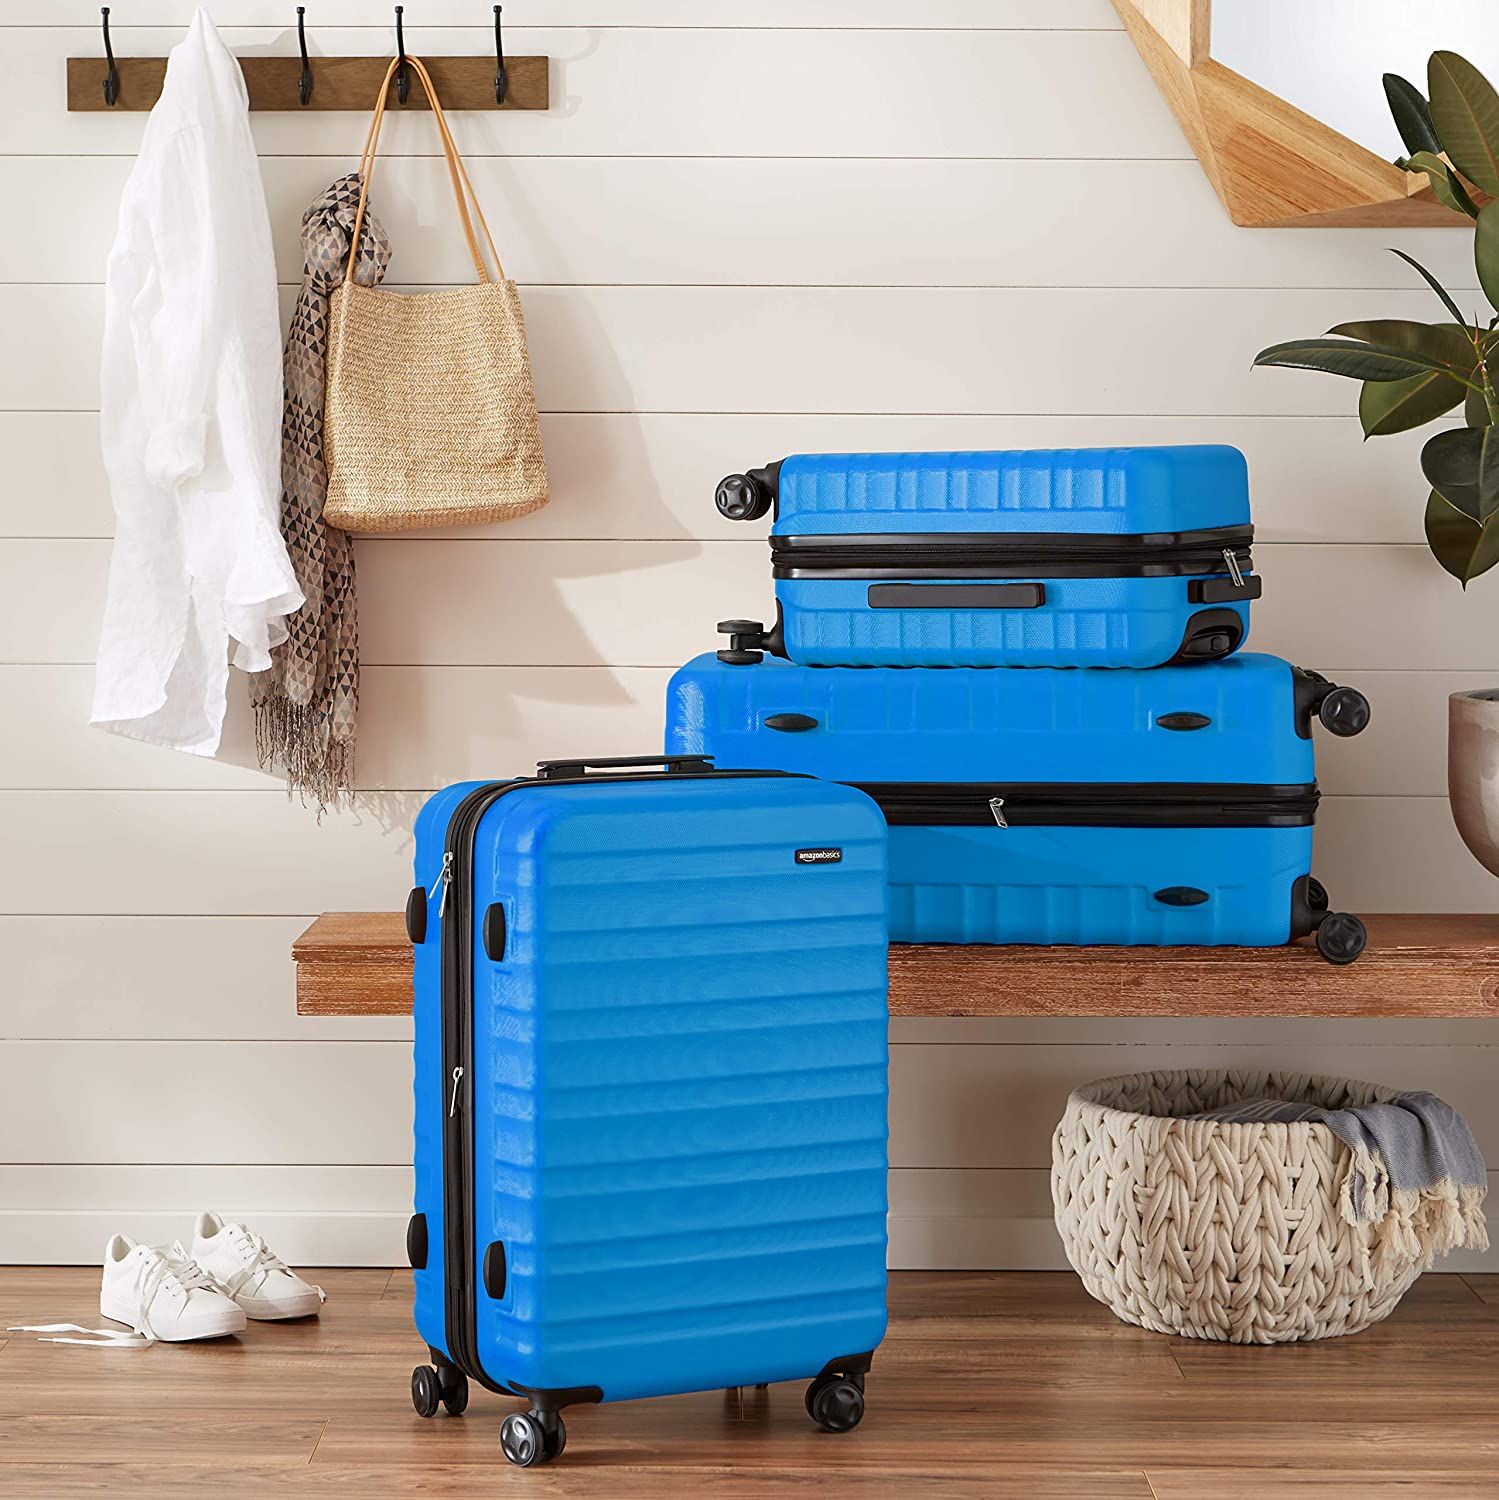 20 Carry-On & 28 Checked Suitcase Color : Local Gold, Size : 28 Minmin-lgx Luggage Lightweight Hardside 4-Wheel Spinner Luggage Set 